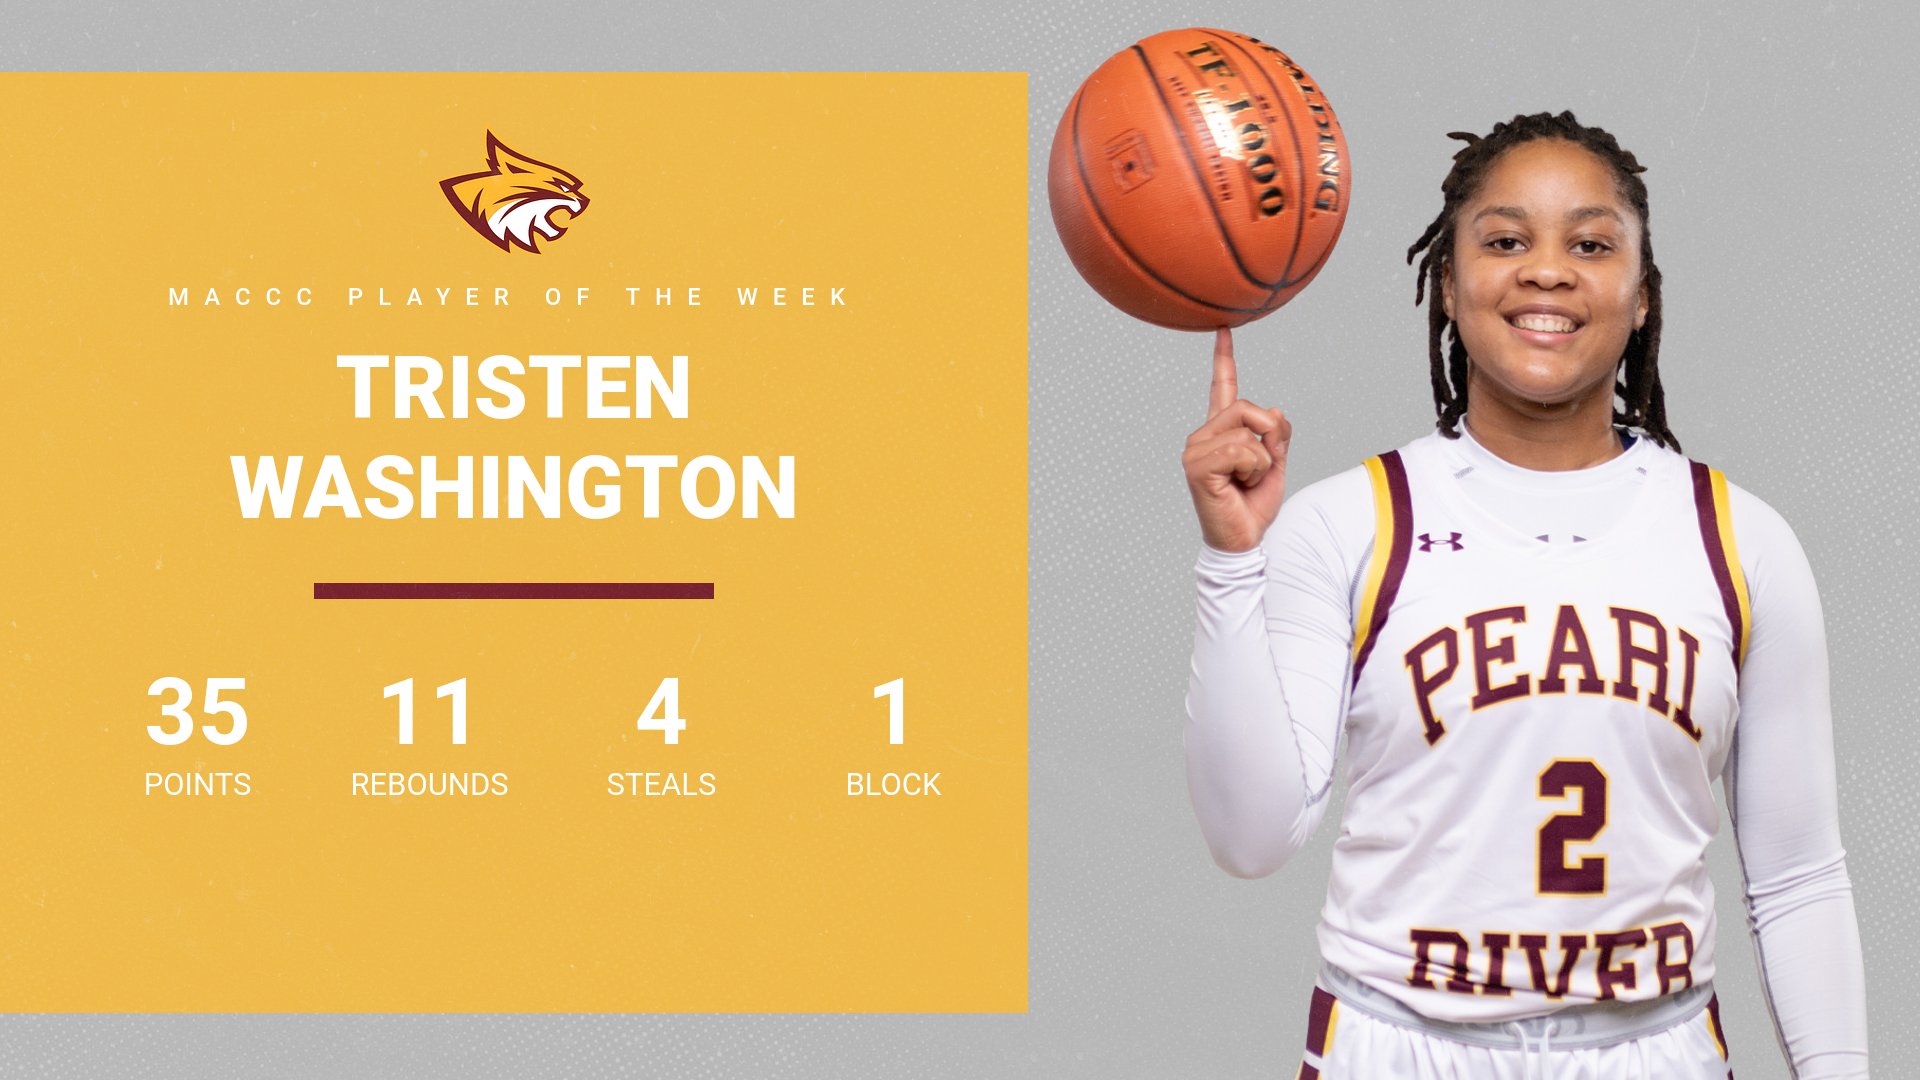 Pearl River’s Tristen Washington named MACCC Player of the Week